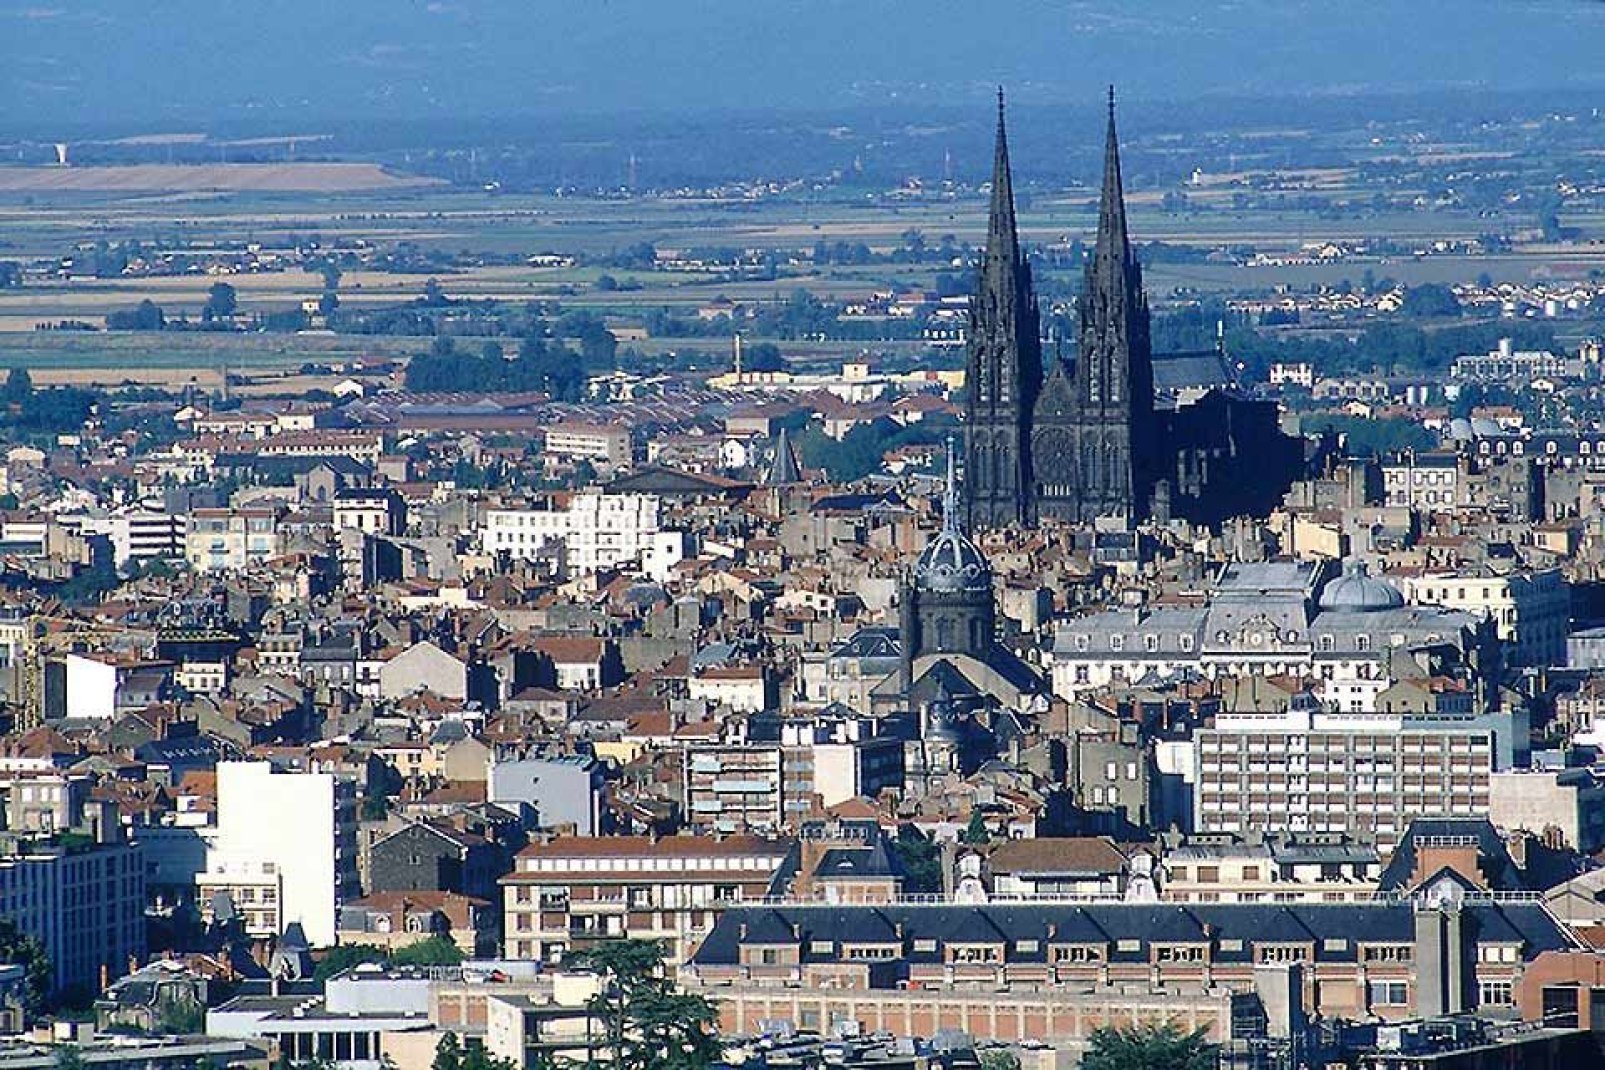 Clermont-Ferrand lies amid the region's volcanic mountains, and has an interesting medieval quarter to explore.